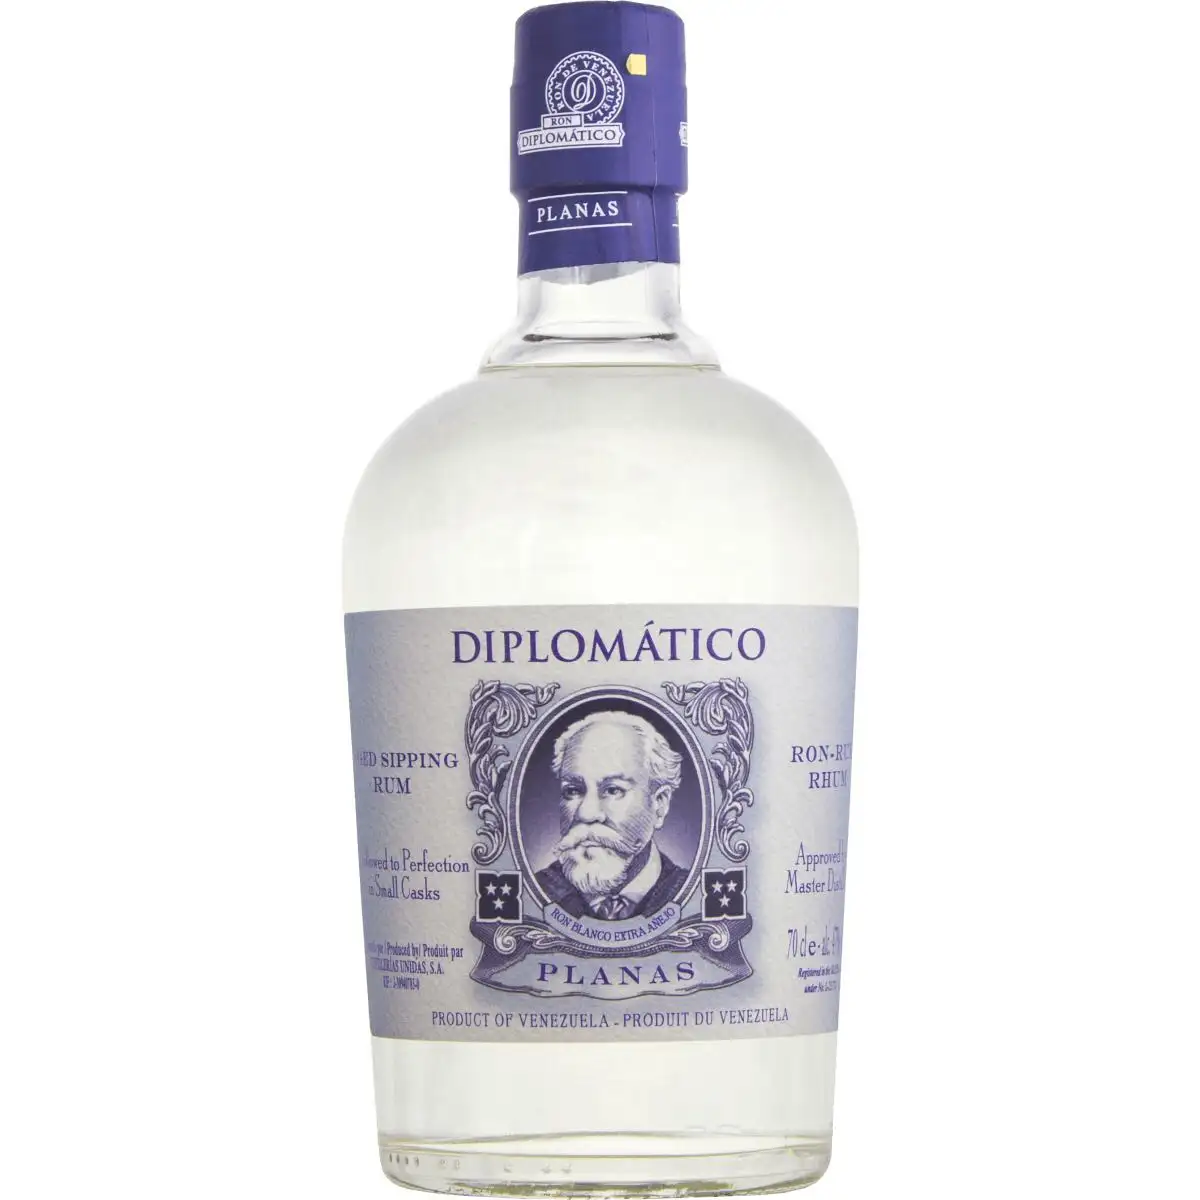 Image of the front of the bottle of the rum Diplomático / Botucal Planas